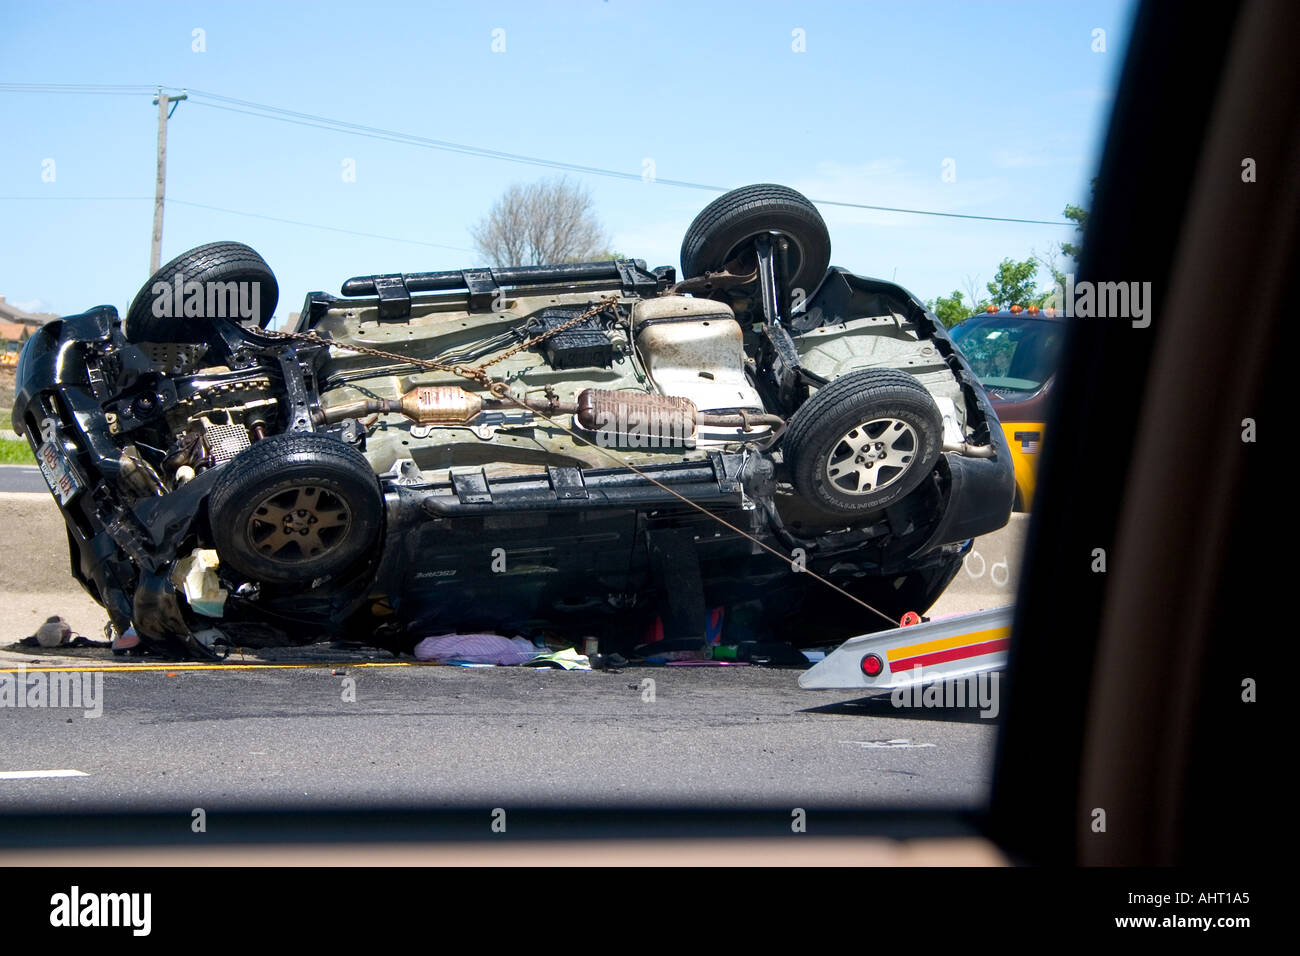 If you've been involved in an auto accident and needed legal assistance, you already know that choosing the right lawyer is critical. Car Accident On Stevenson Expressway Van Rollover Chicago Illinois Il Usa Stock Photo Alamy